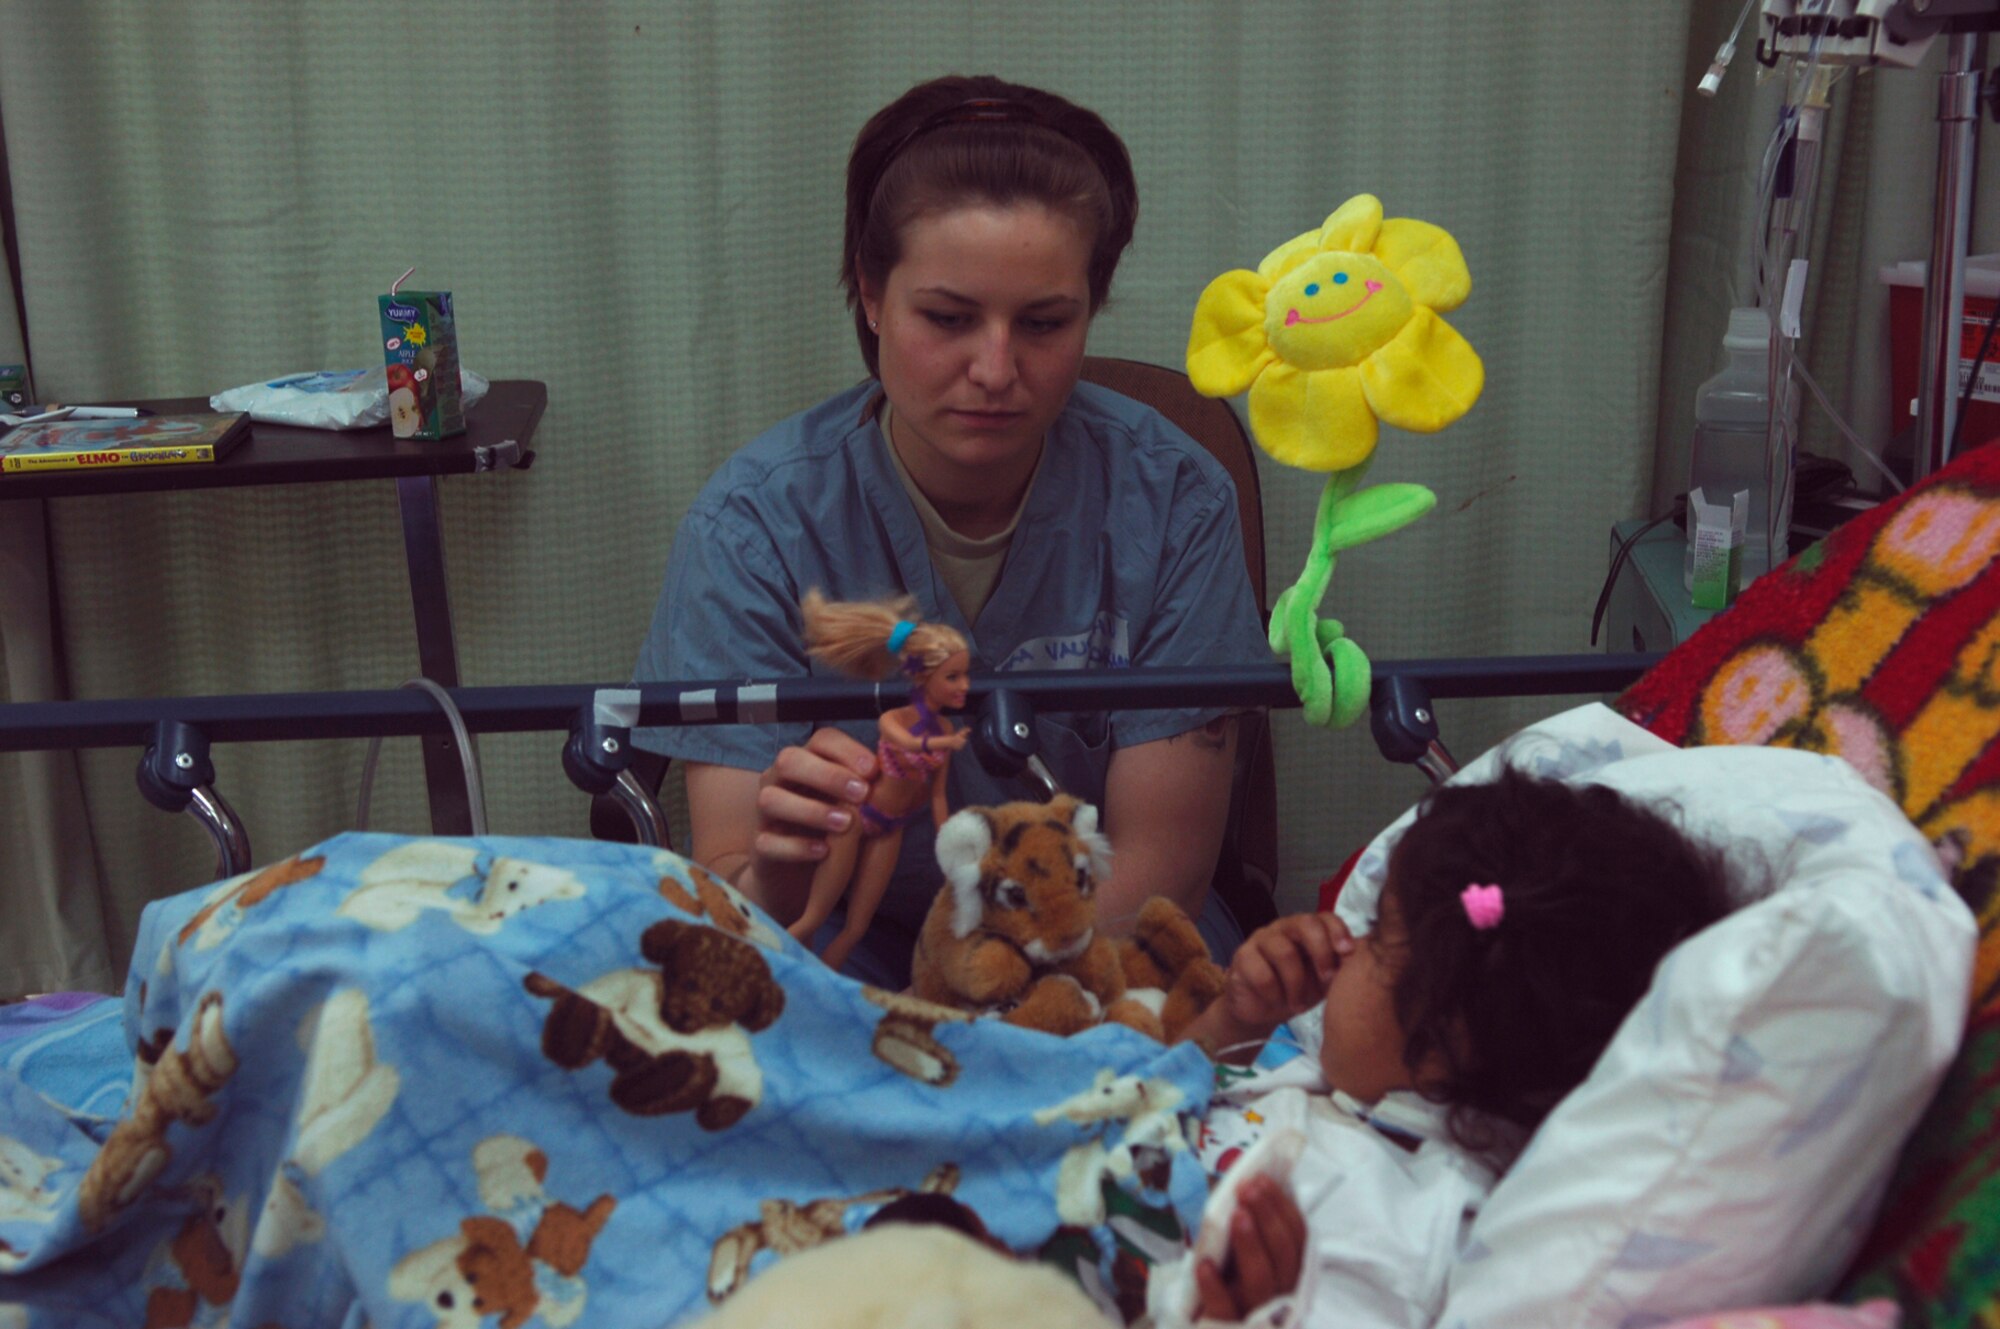 BALAD AIR BASE, Iraq -- Senior Airman Nicole Vaughn, assigned to the 23rd Expeditionary Fighter Squadron, spends time with a young Iraqi girl, a patient at the Air Force Theater Hospital here, as part of a job swap program. The program allows Airmen outside of the medical career field to spend a day shadowing hospital personnel. Airman Vaughn is deployed from Spangdahlem Air Base, Germany. (U.S. Air Force photo /Staff Sgt. Mareshah Haynes)